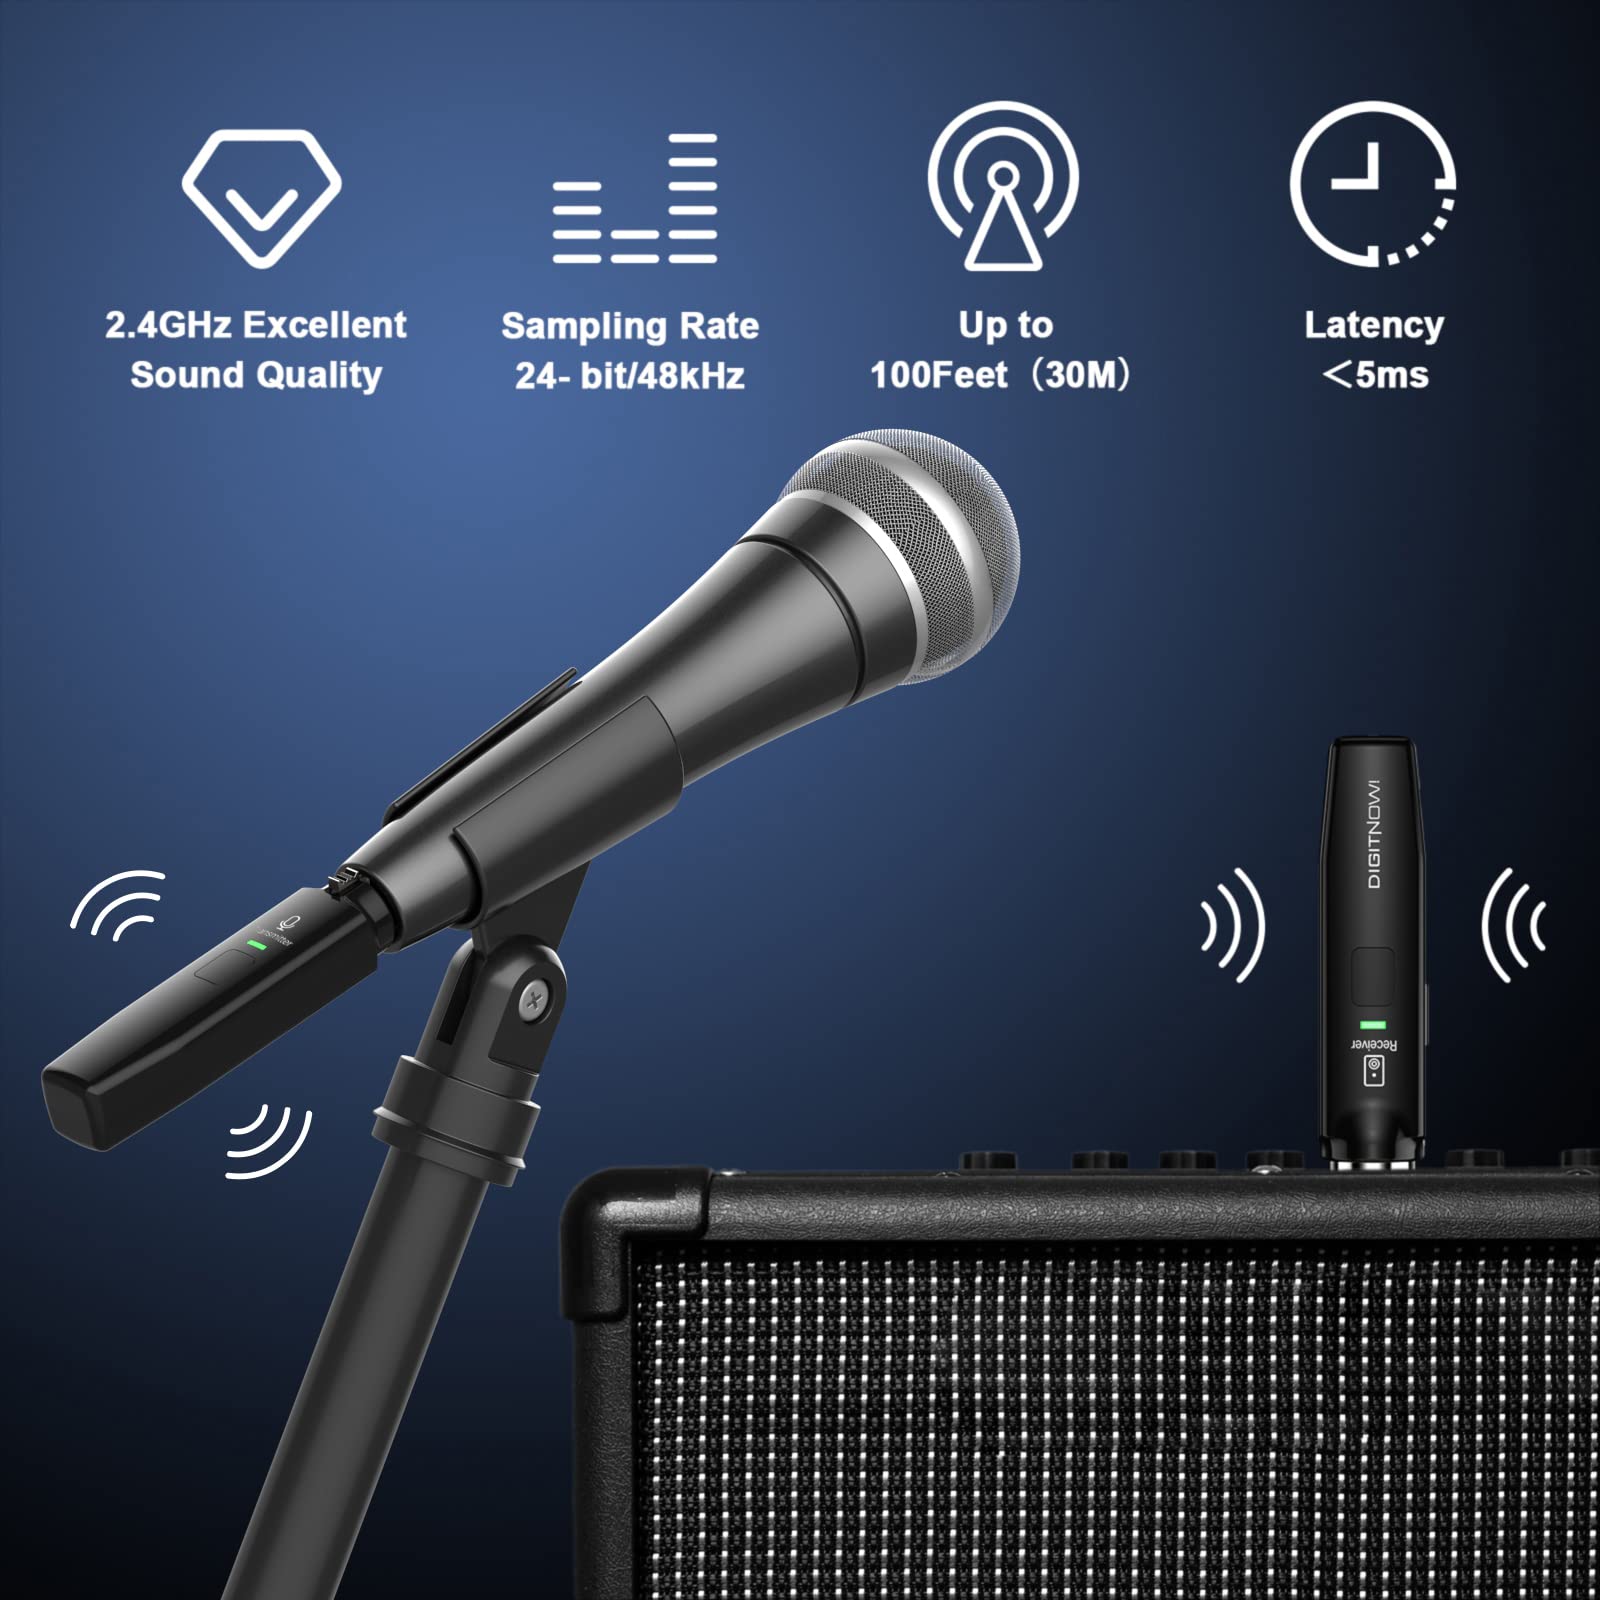 DIGITNOW Microphone Wireless System,2.4GHz Wireless Mic Adapter,Rechargeable Wireless XLR Transmitter and Receiver Compatible